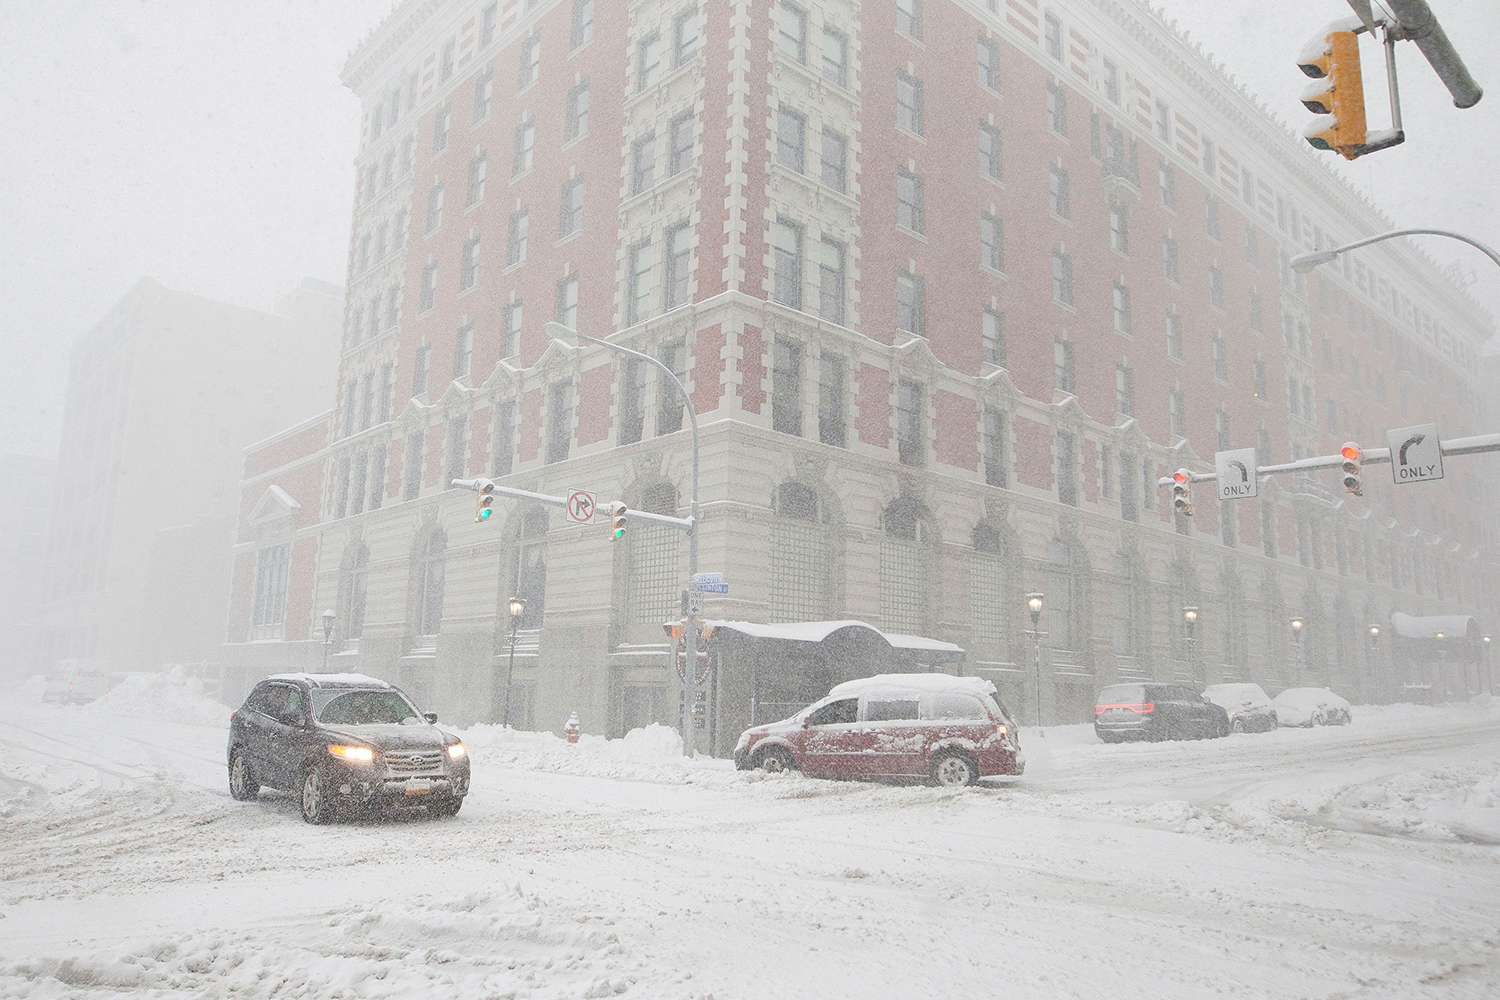 Cars drive along Ellicott Street as snow falls, in Buffalo, N.Y. A dangerous lake-effect snowstorm paralyzed parts of western and northern New York, with nearly 2 feet of snow already on the ground in some places and possibly much more on the way